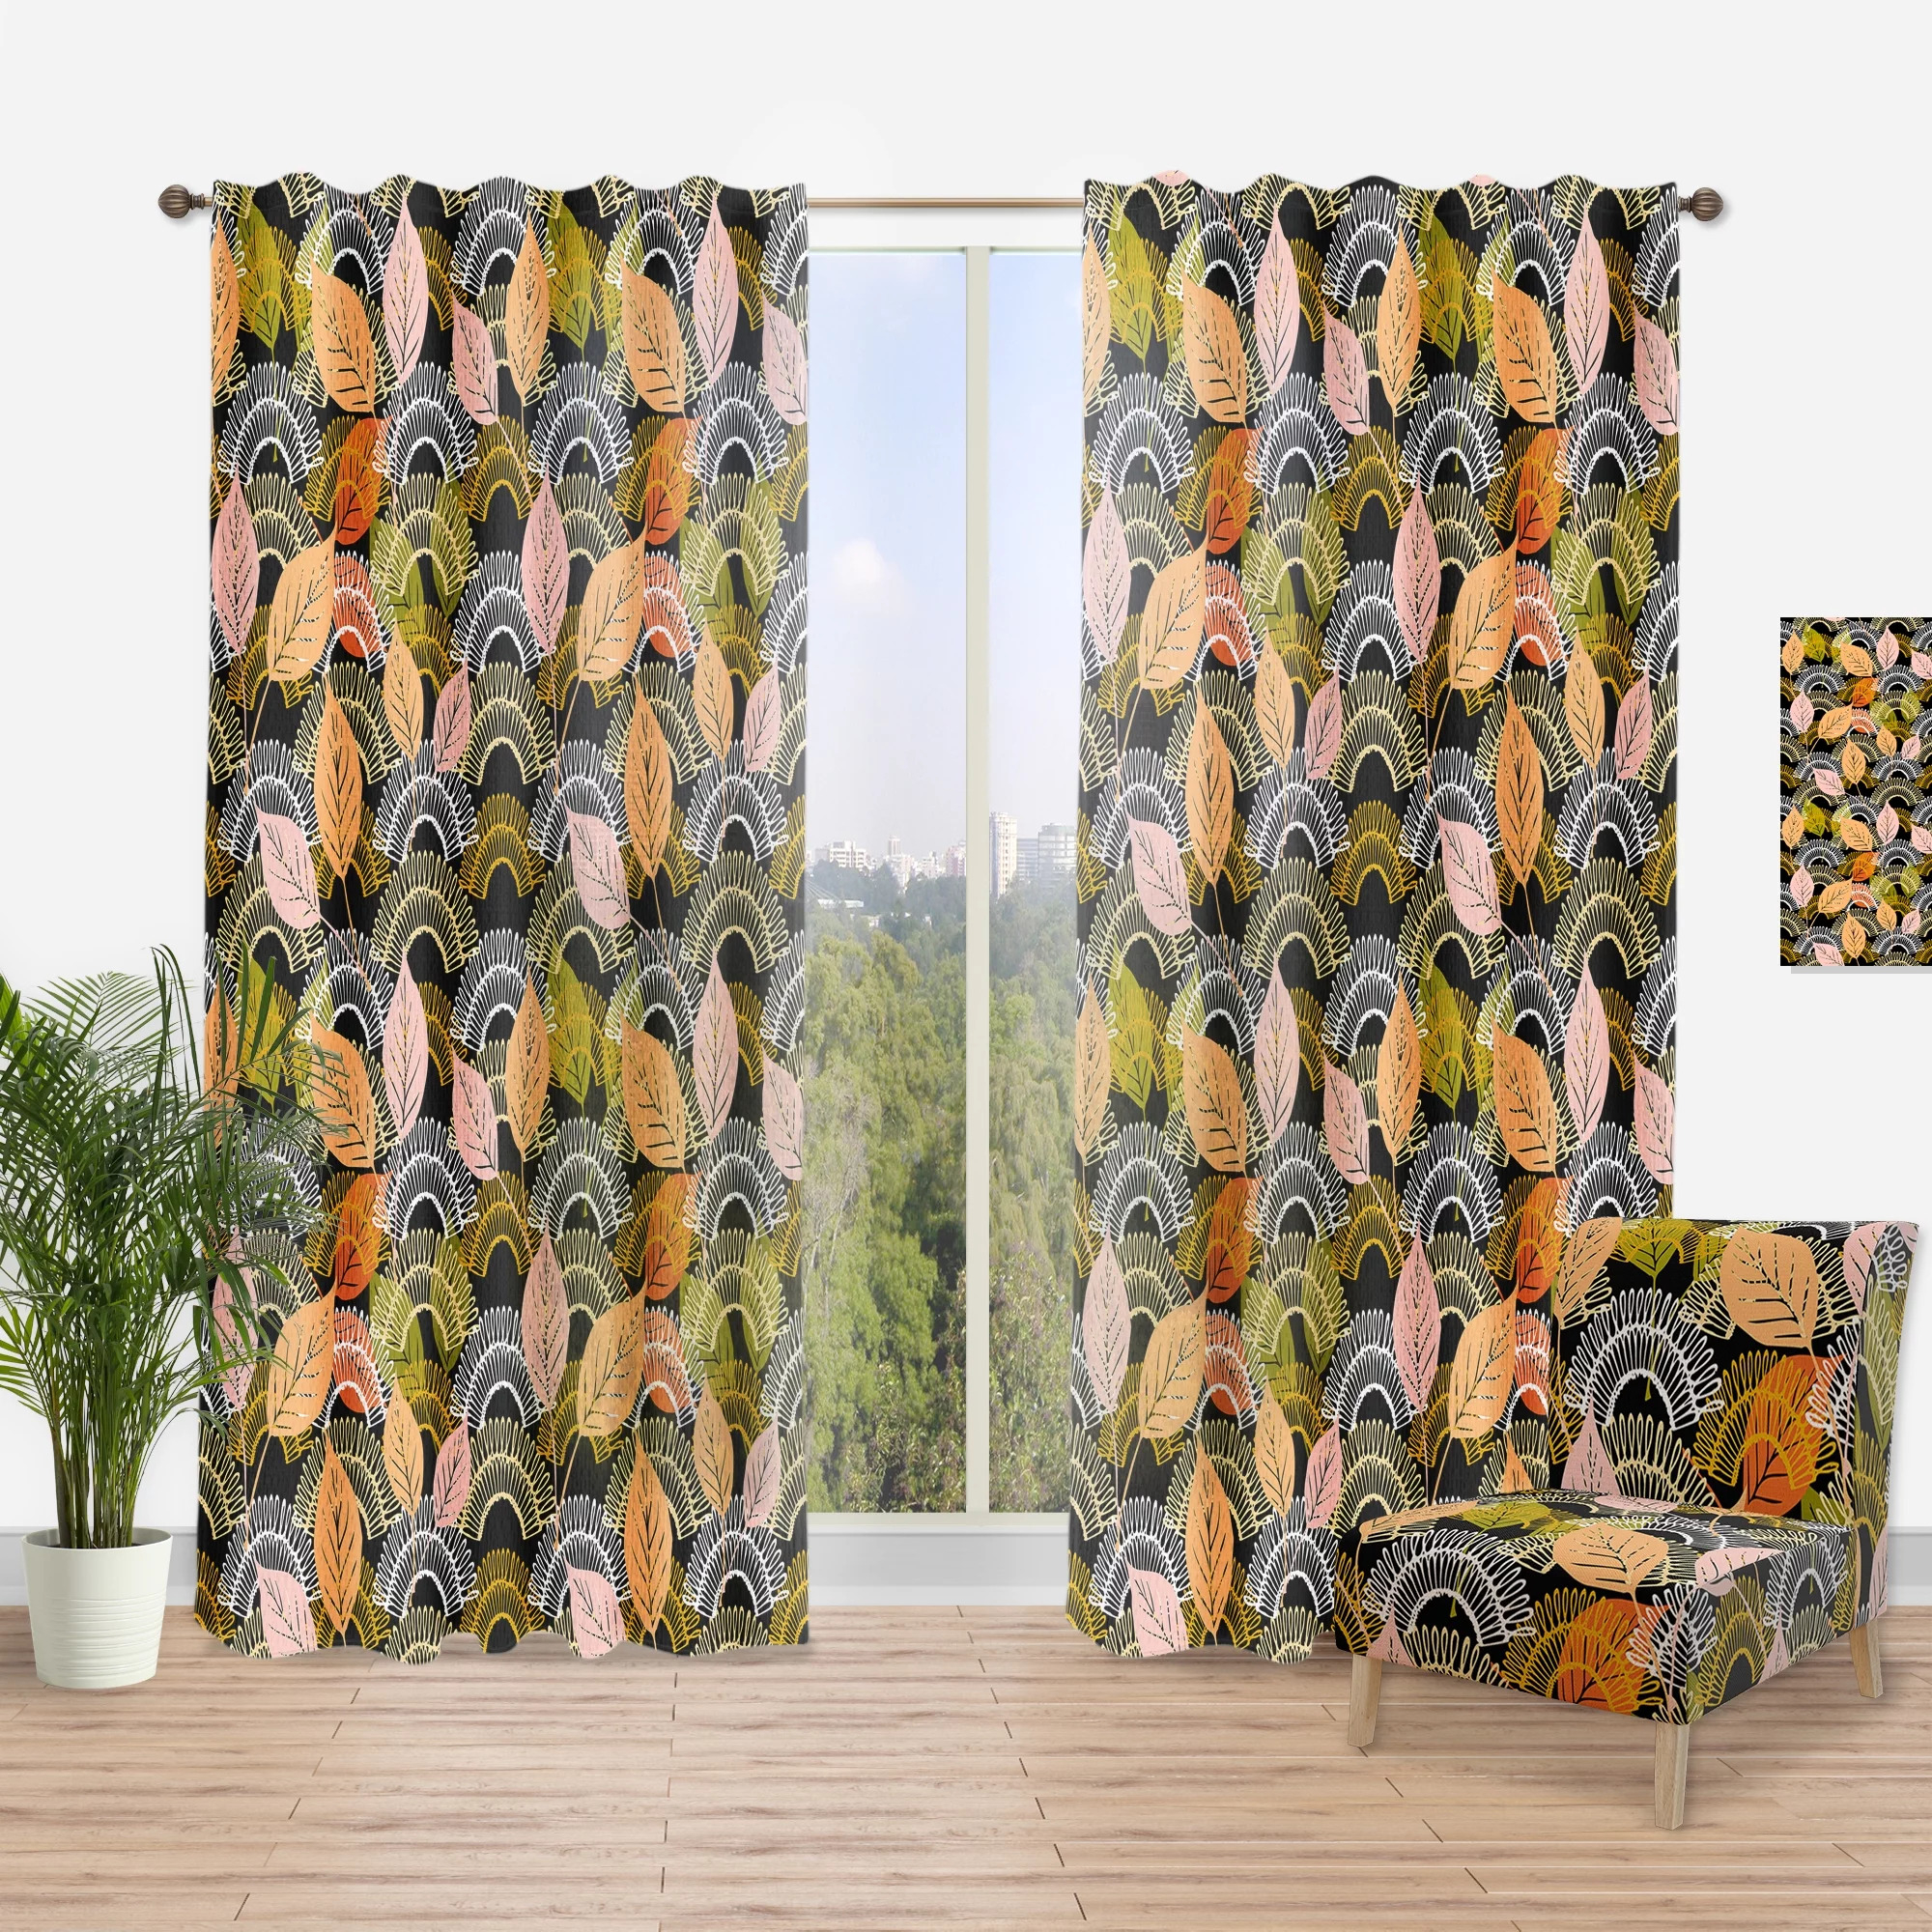 The curtain panel with different colored leaves